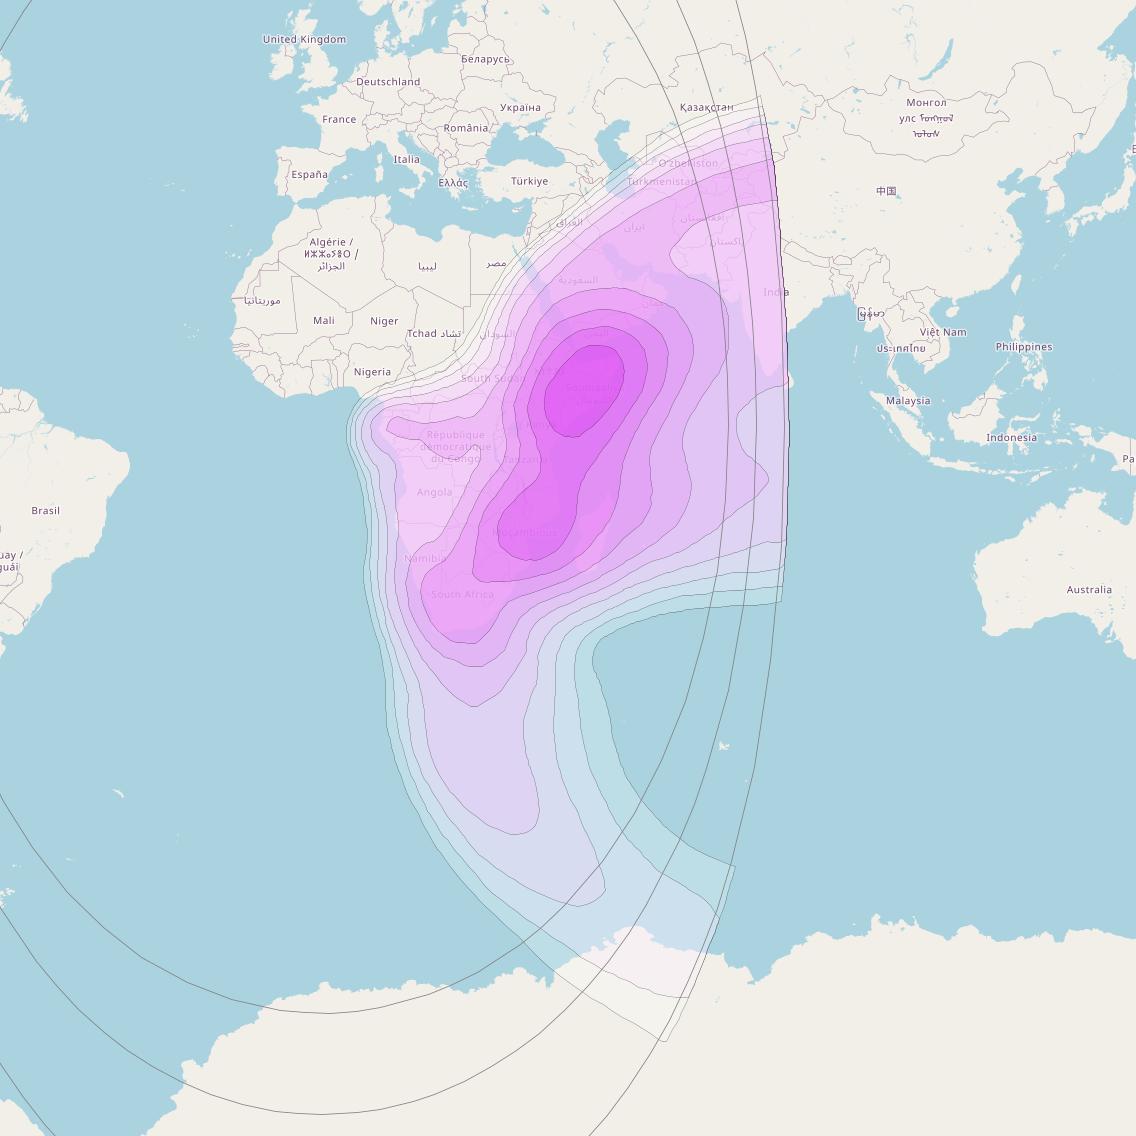 Intelsat 10-02 at 1° W downlink C-band South East Zone Beam coverage map